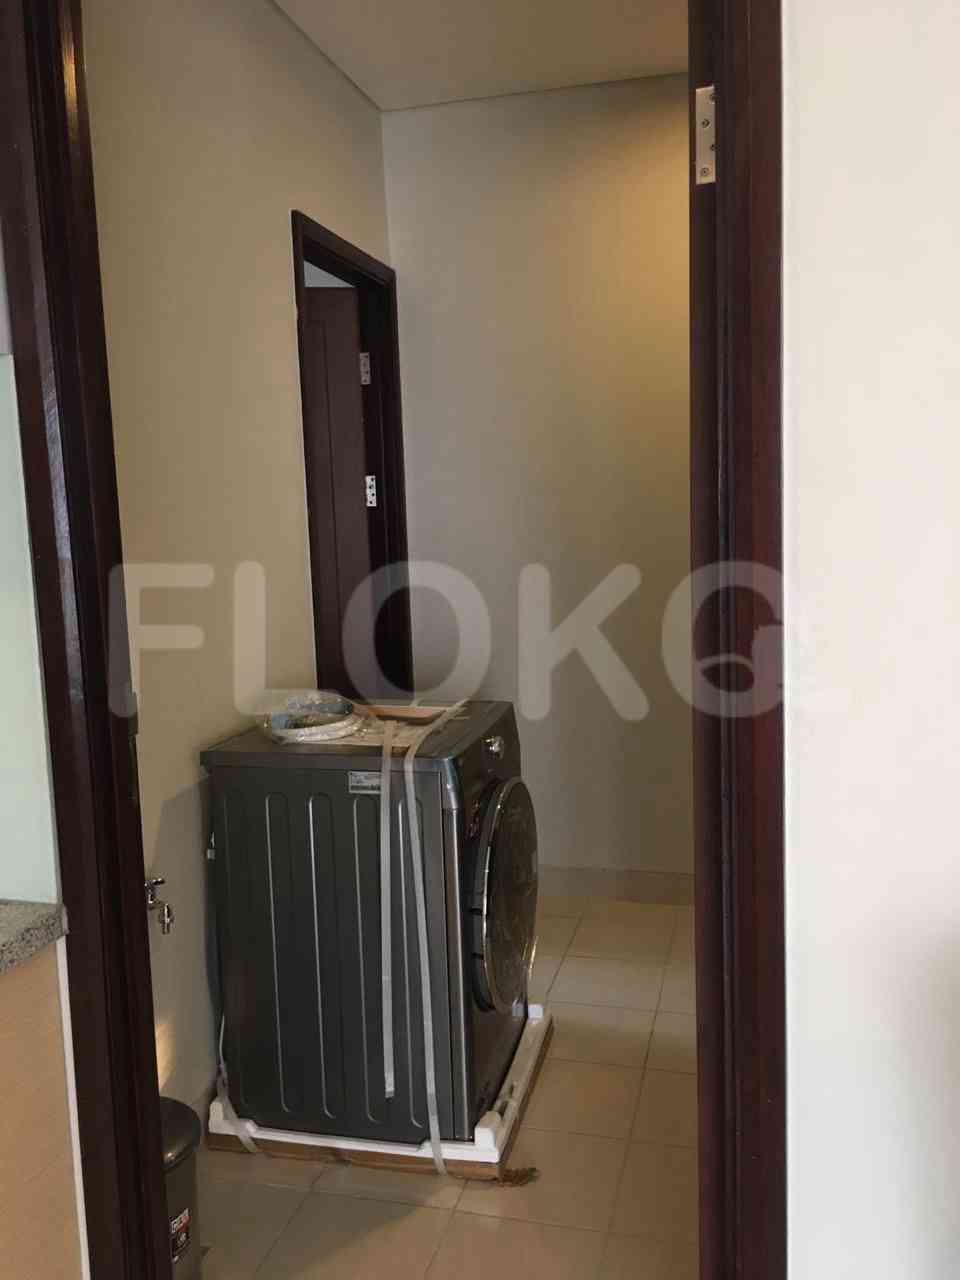 2 Bedroom on 37th Floor for Rent in The Grove Apartment - fku32a 6